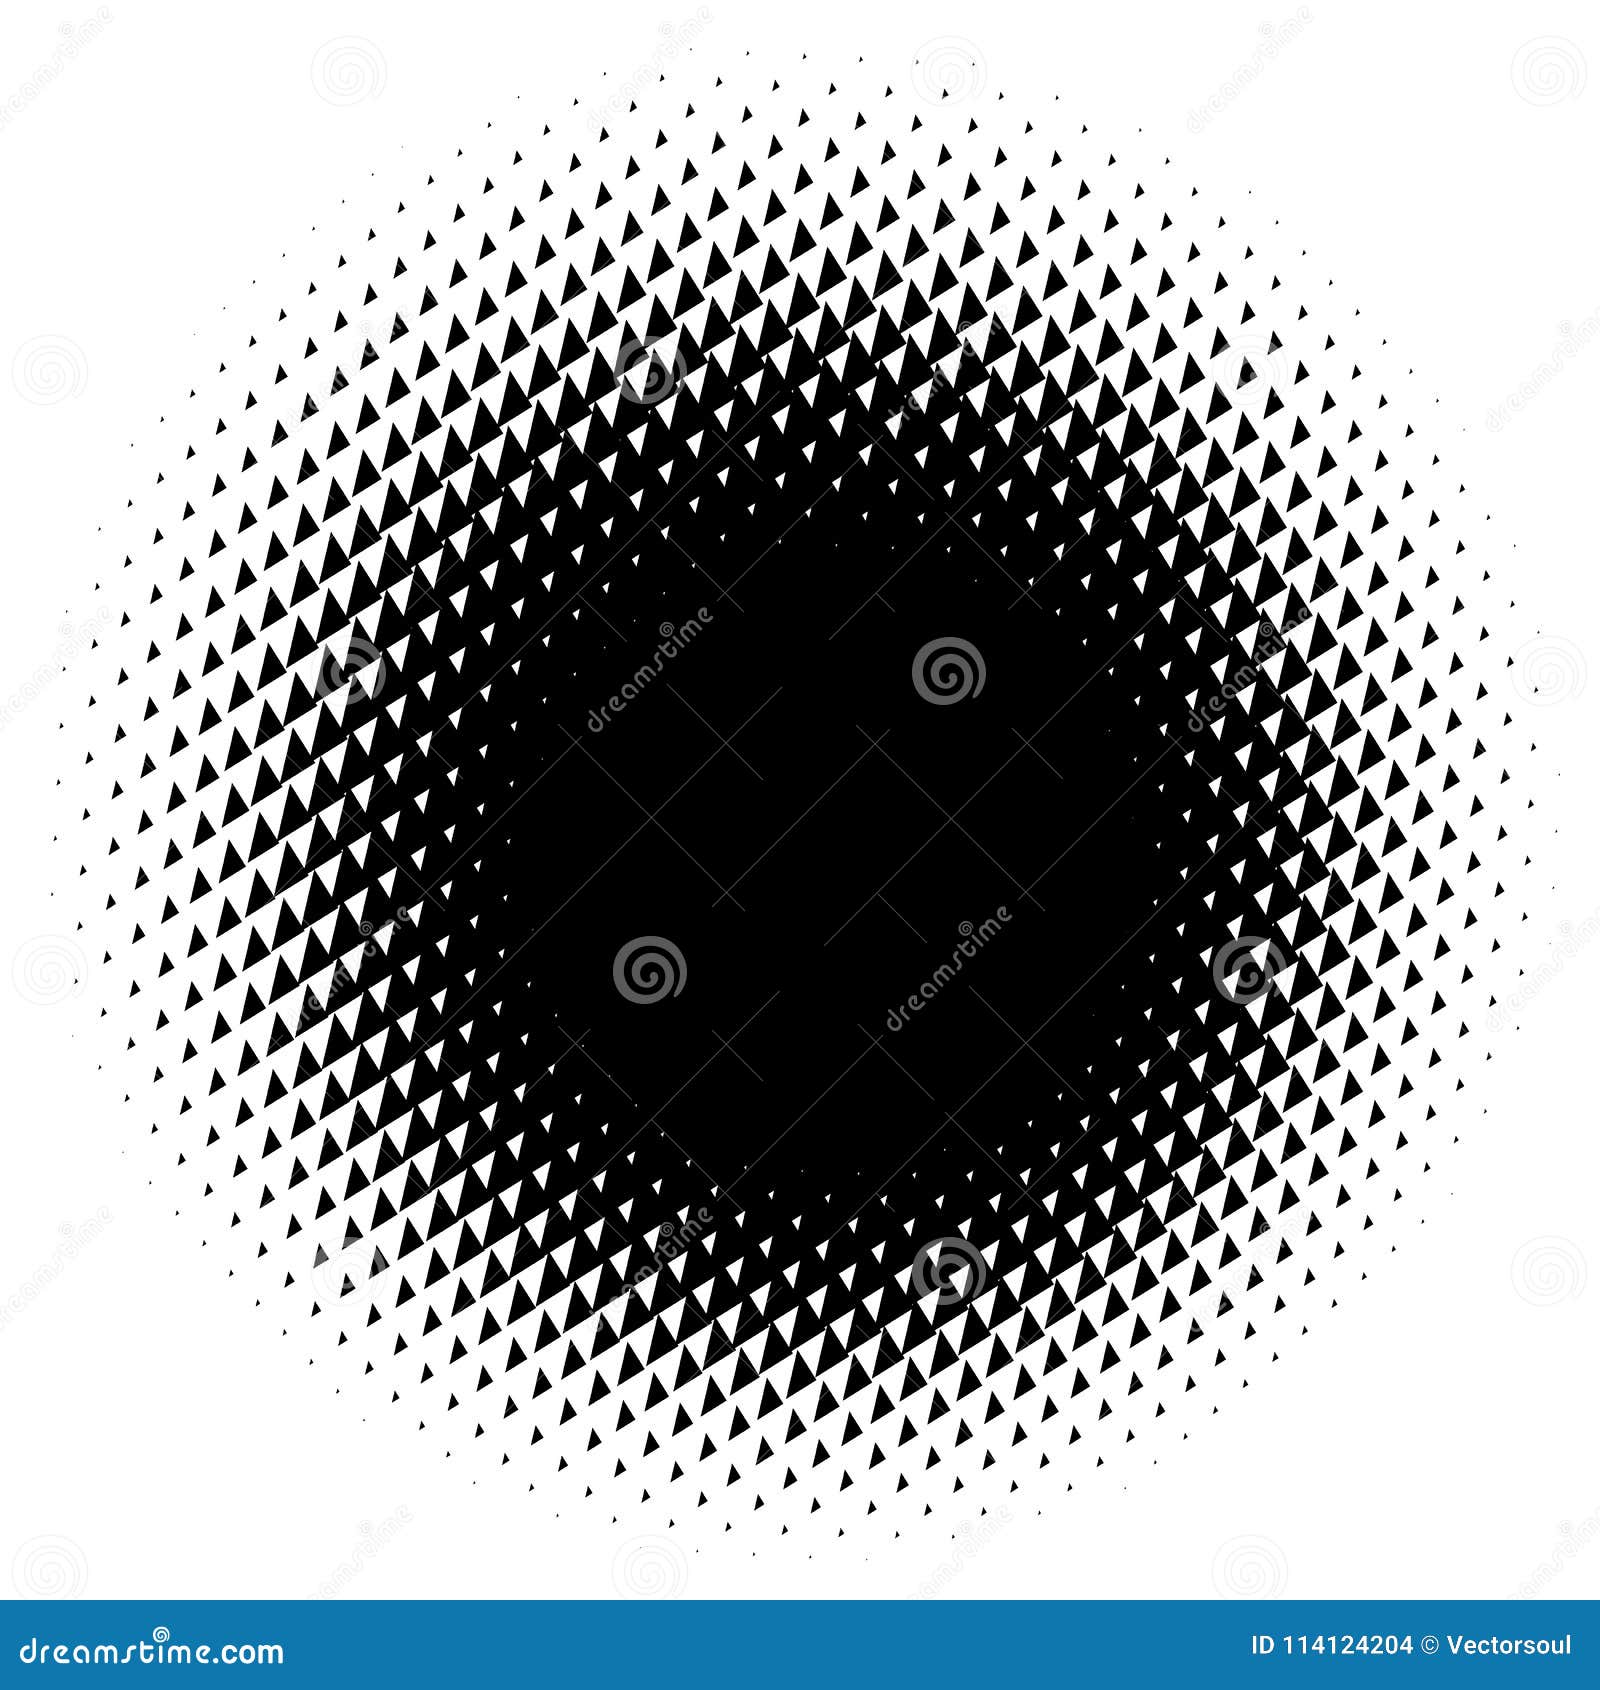 Halftone Element Abstract Geometric Graphic With Half Tone Pattern